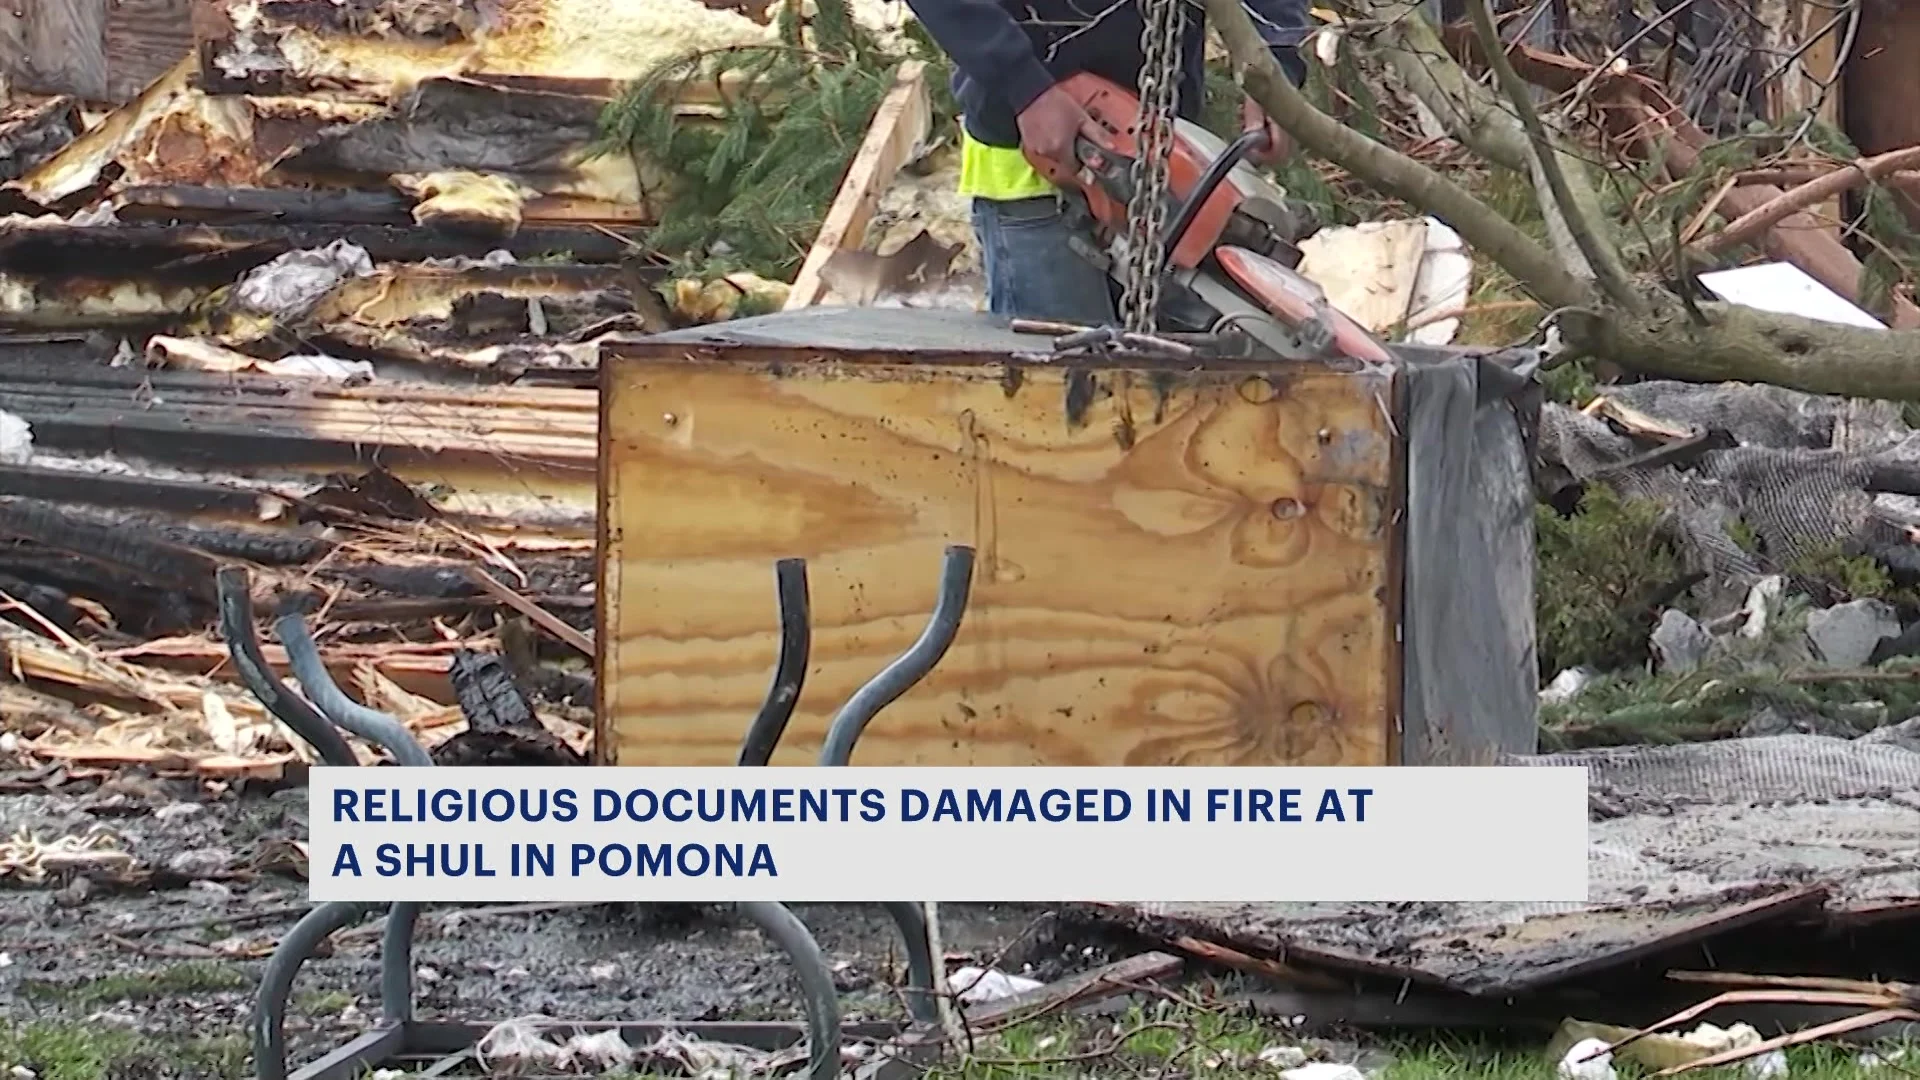 Religious leaders work to salvage sacred Torah scrolls after fire